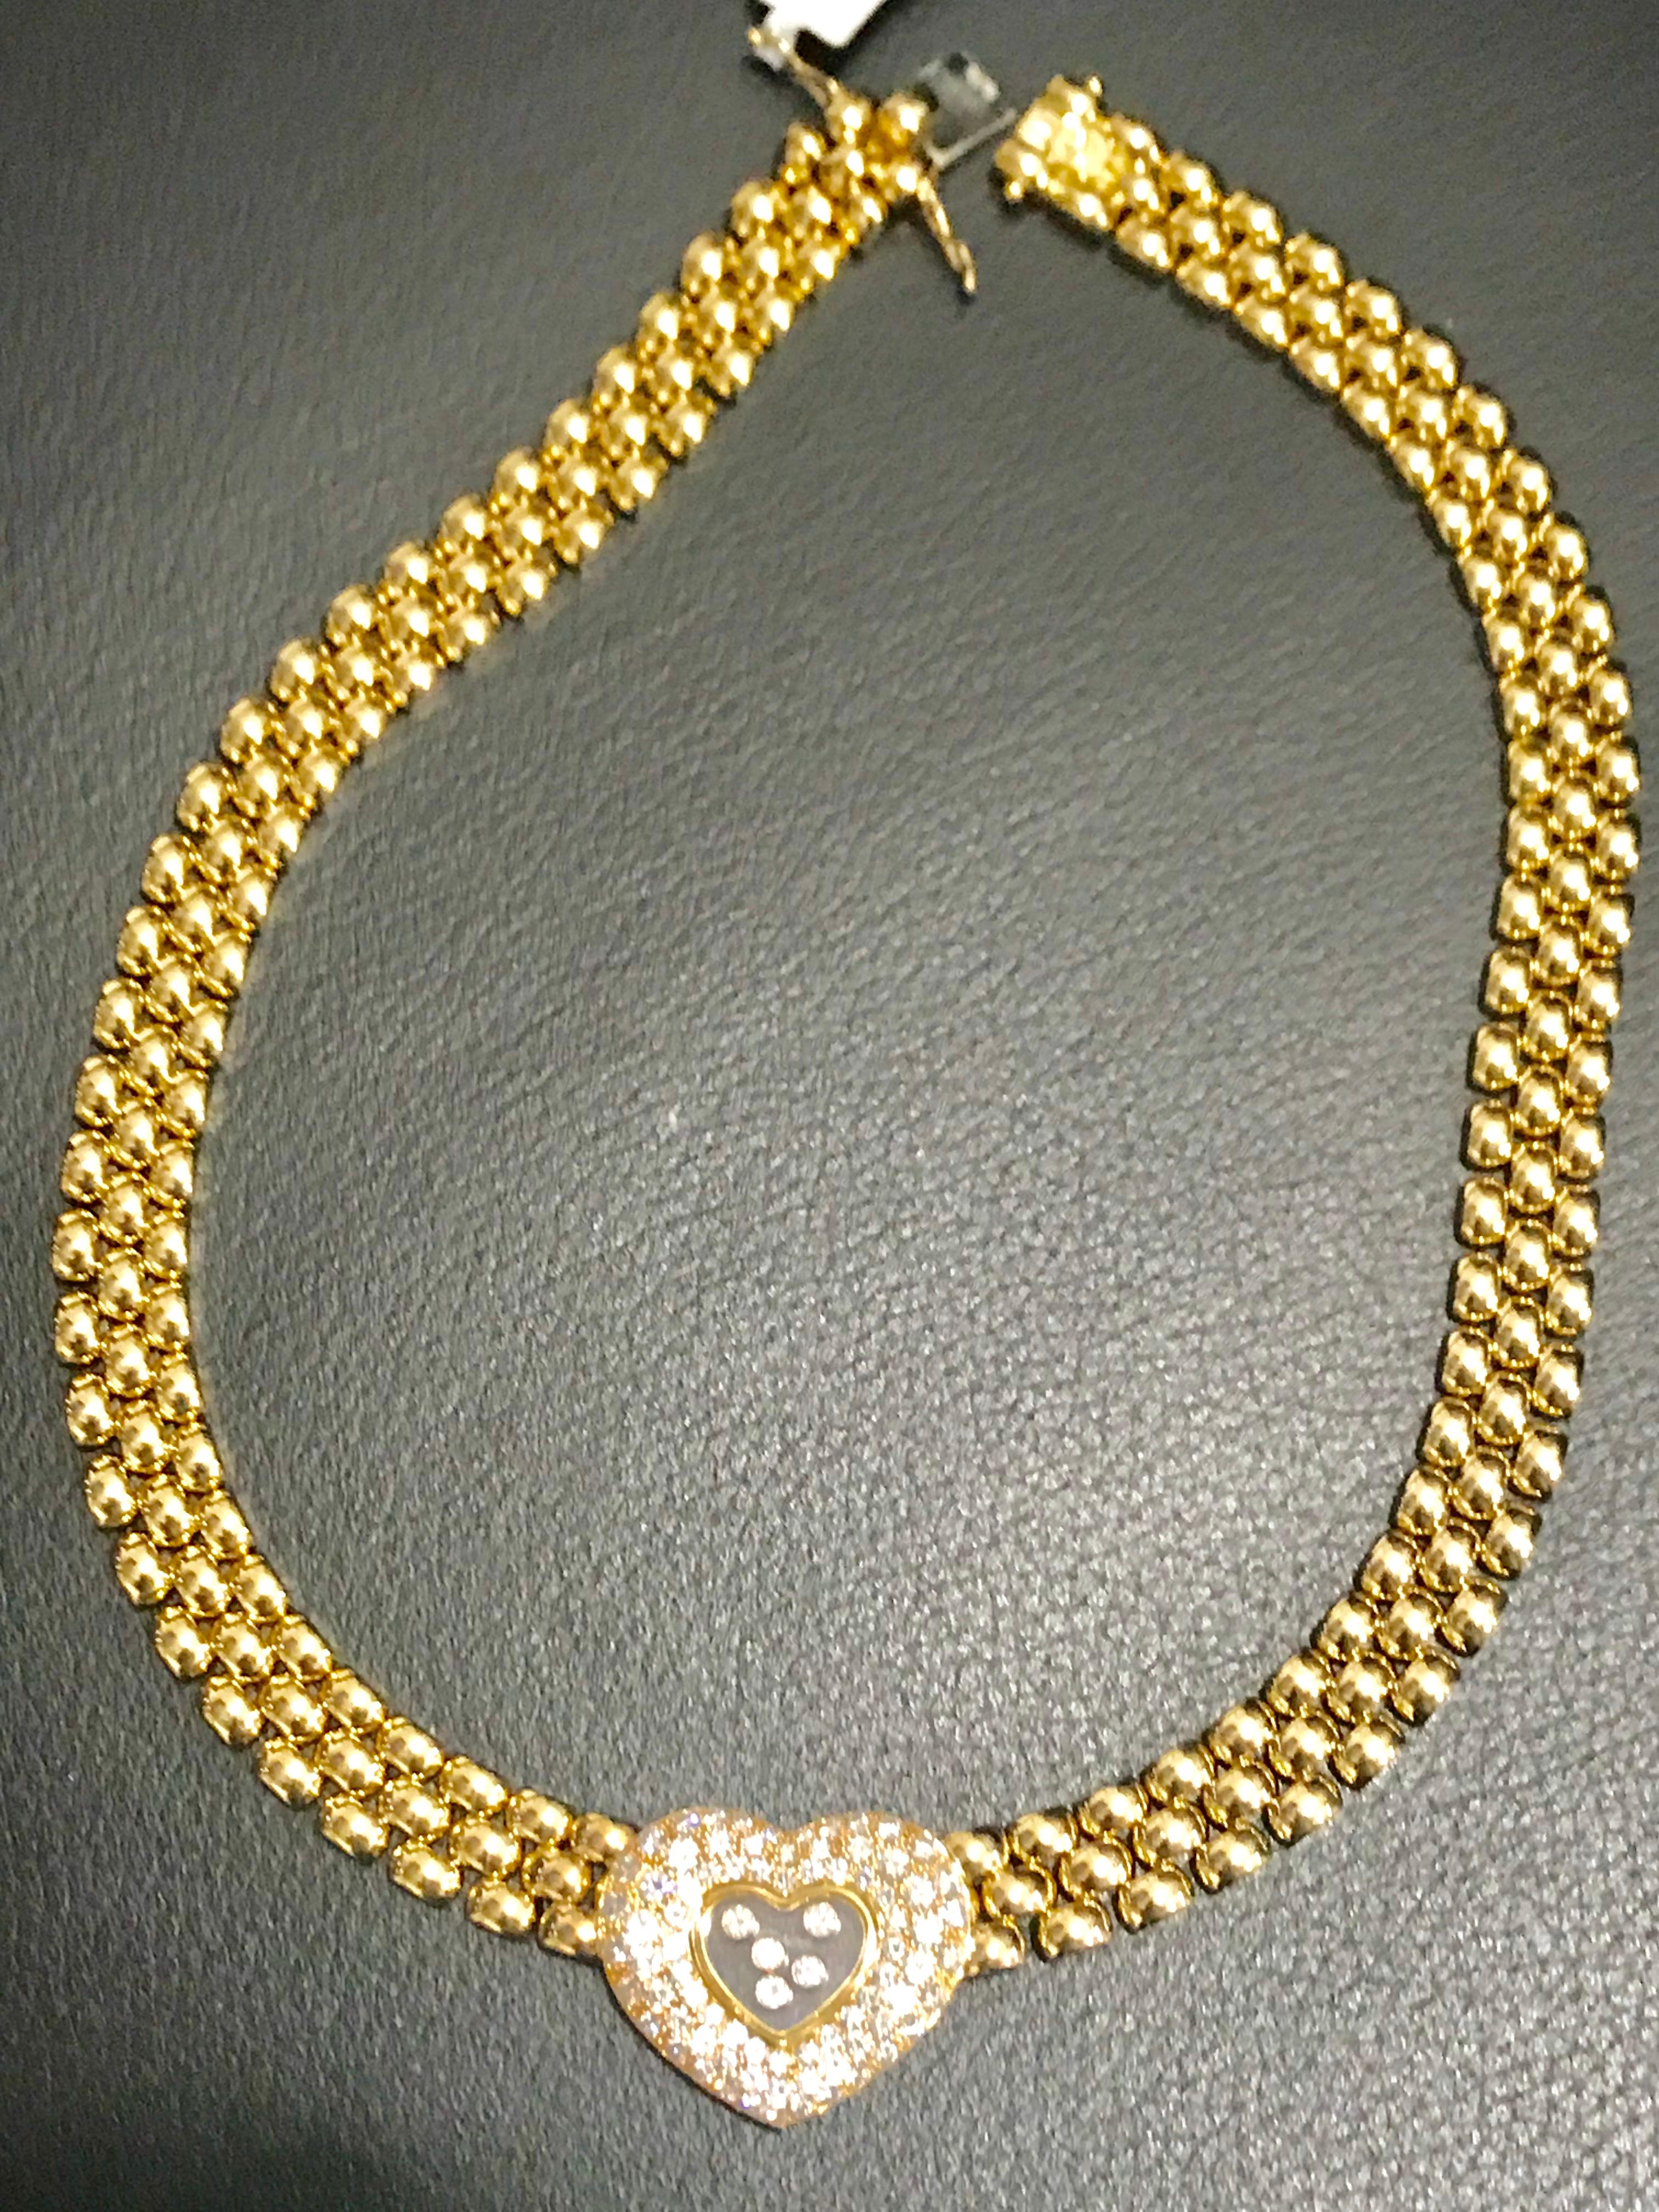 Chopard Happy Diamonds Diamond Heart Yellow Gold Necklace 18 Karat Gold, Estate In Excellent Condition For Sale In New York, NY